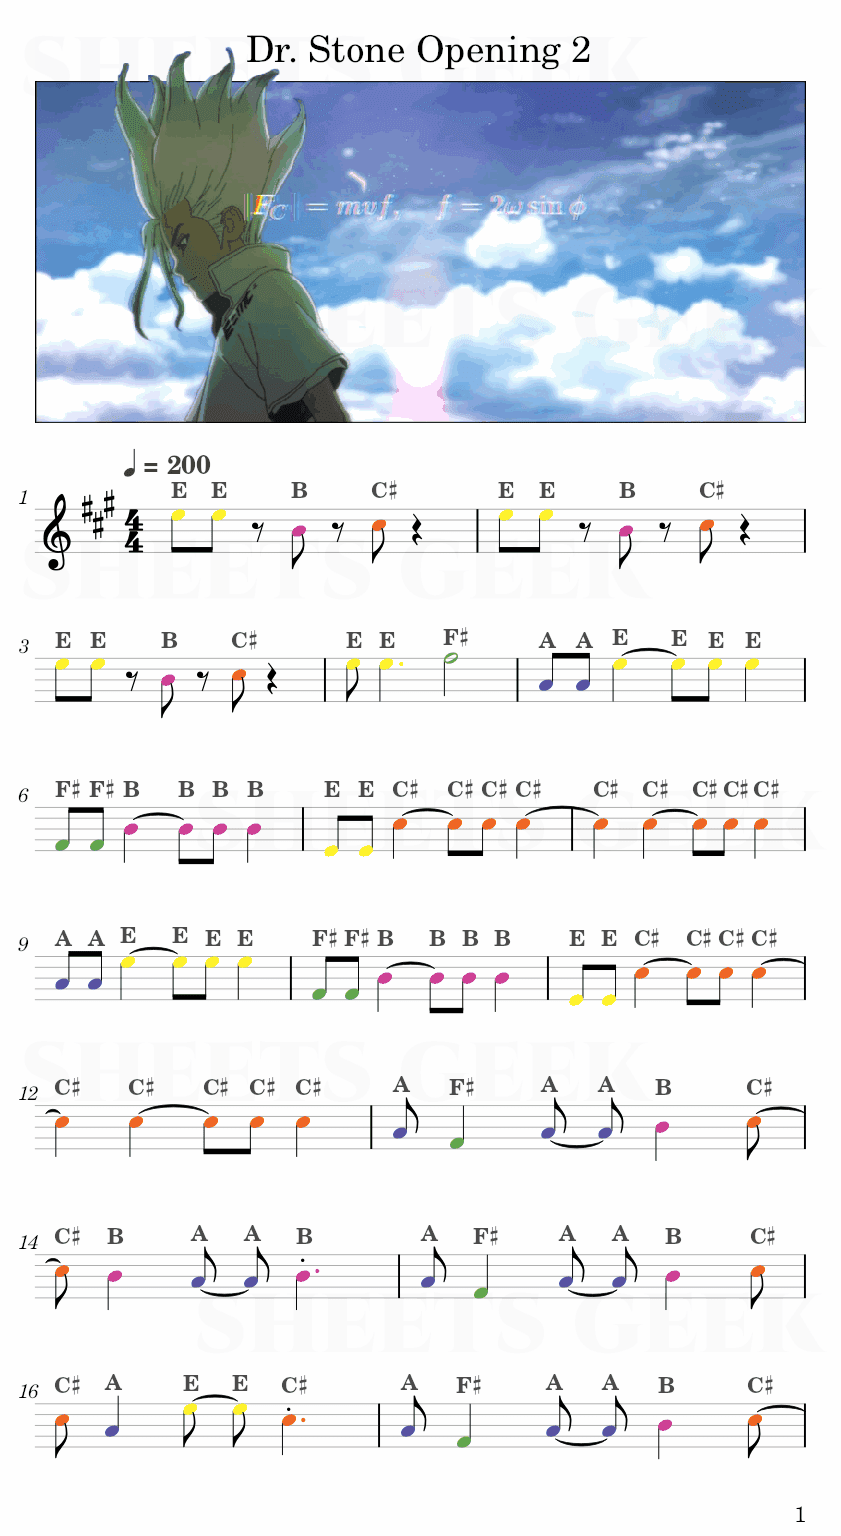 Sangenshoku by Pelican Fanclub - Dr. Stone Opening 2 Easy Sheet Music Free for piano, keyboard, flute, violin, sax, cello page 1